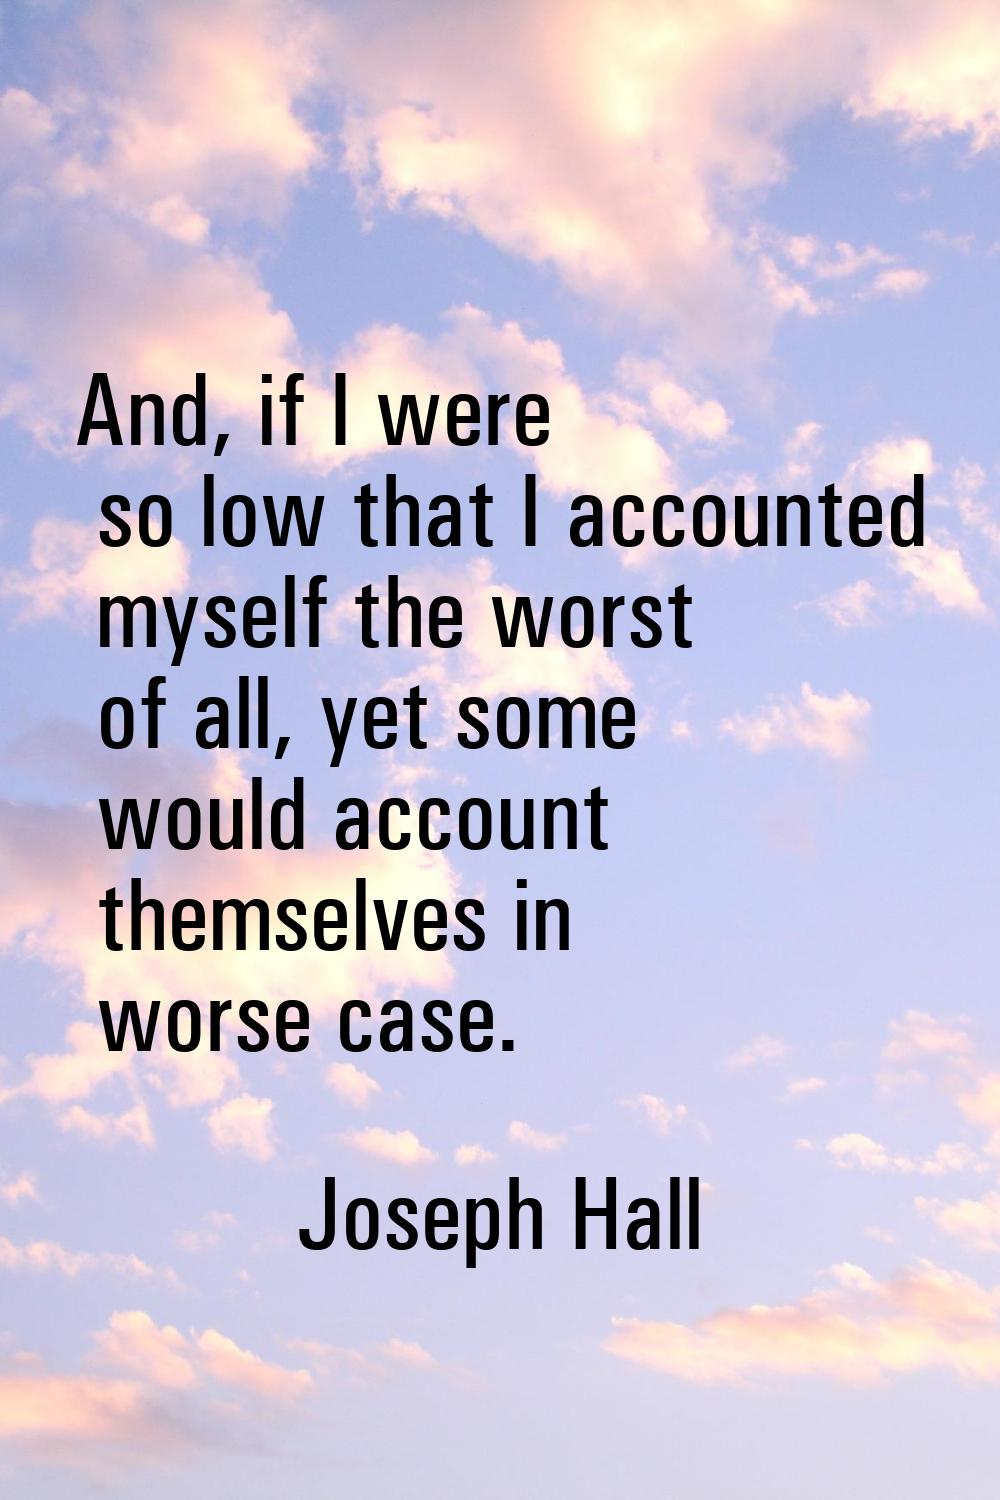 And, if I were so low that I accounted myself the worst of all, yet some would account themselves i